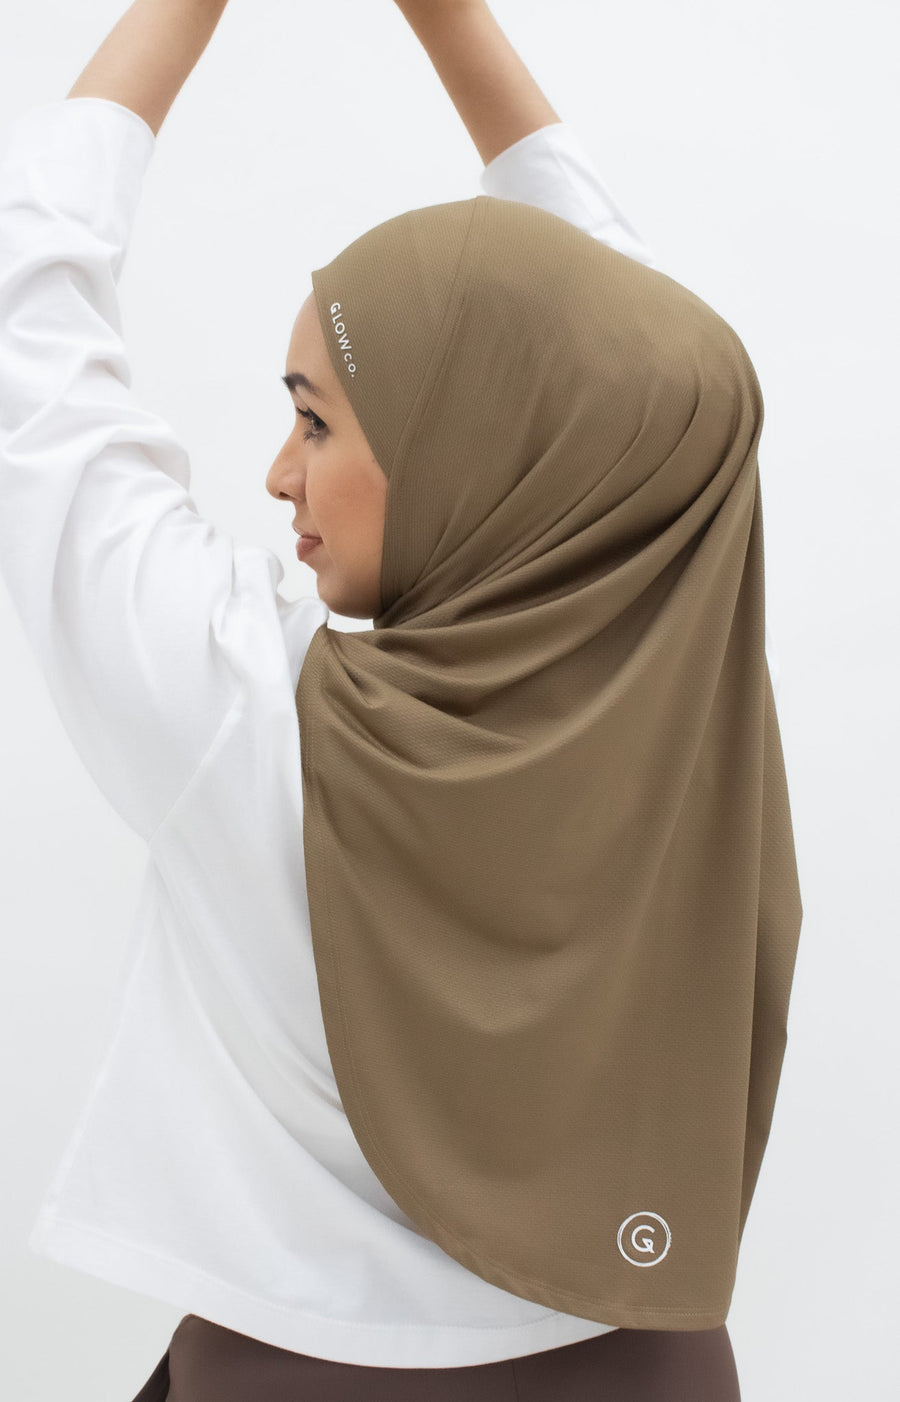 Sports Hijabs GLOWco Exclusive Instant Maxi in Cocoa Brown